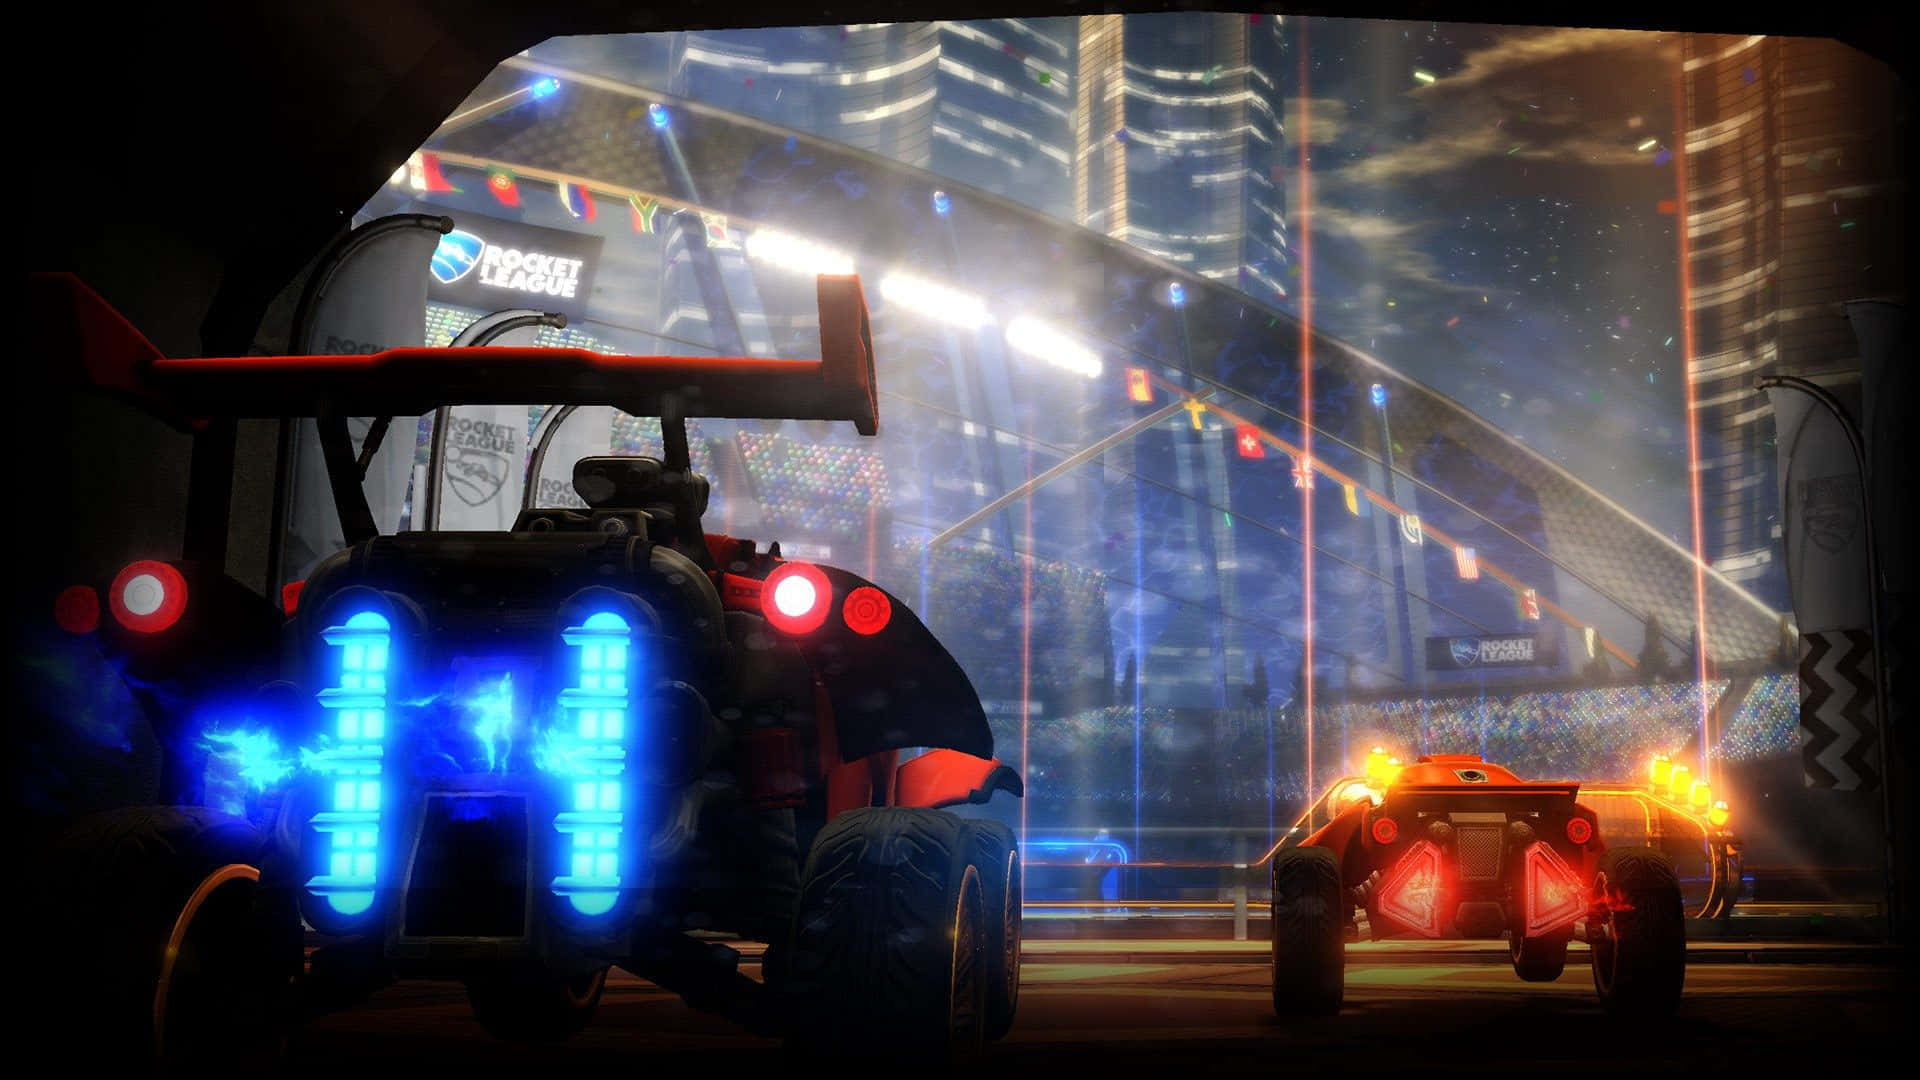 Reach for the skies and blast off in HD Rocket League!